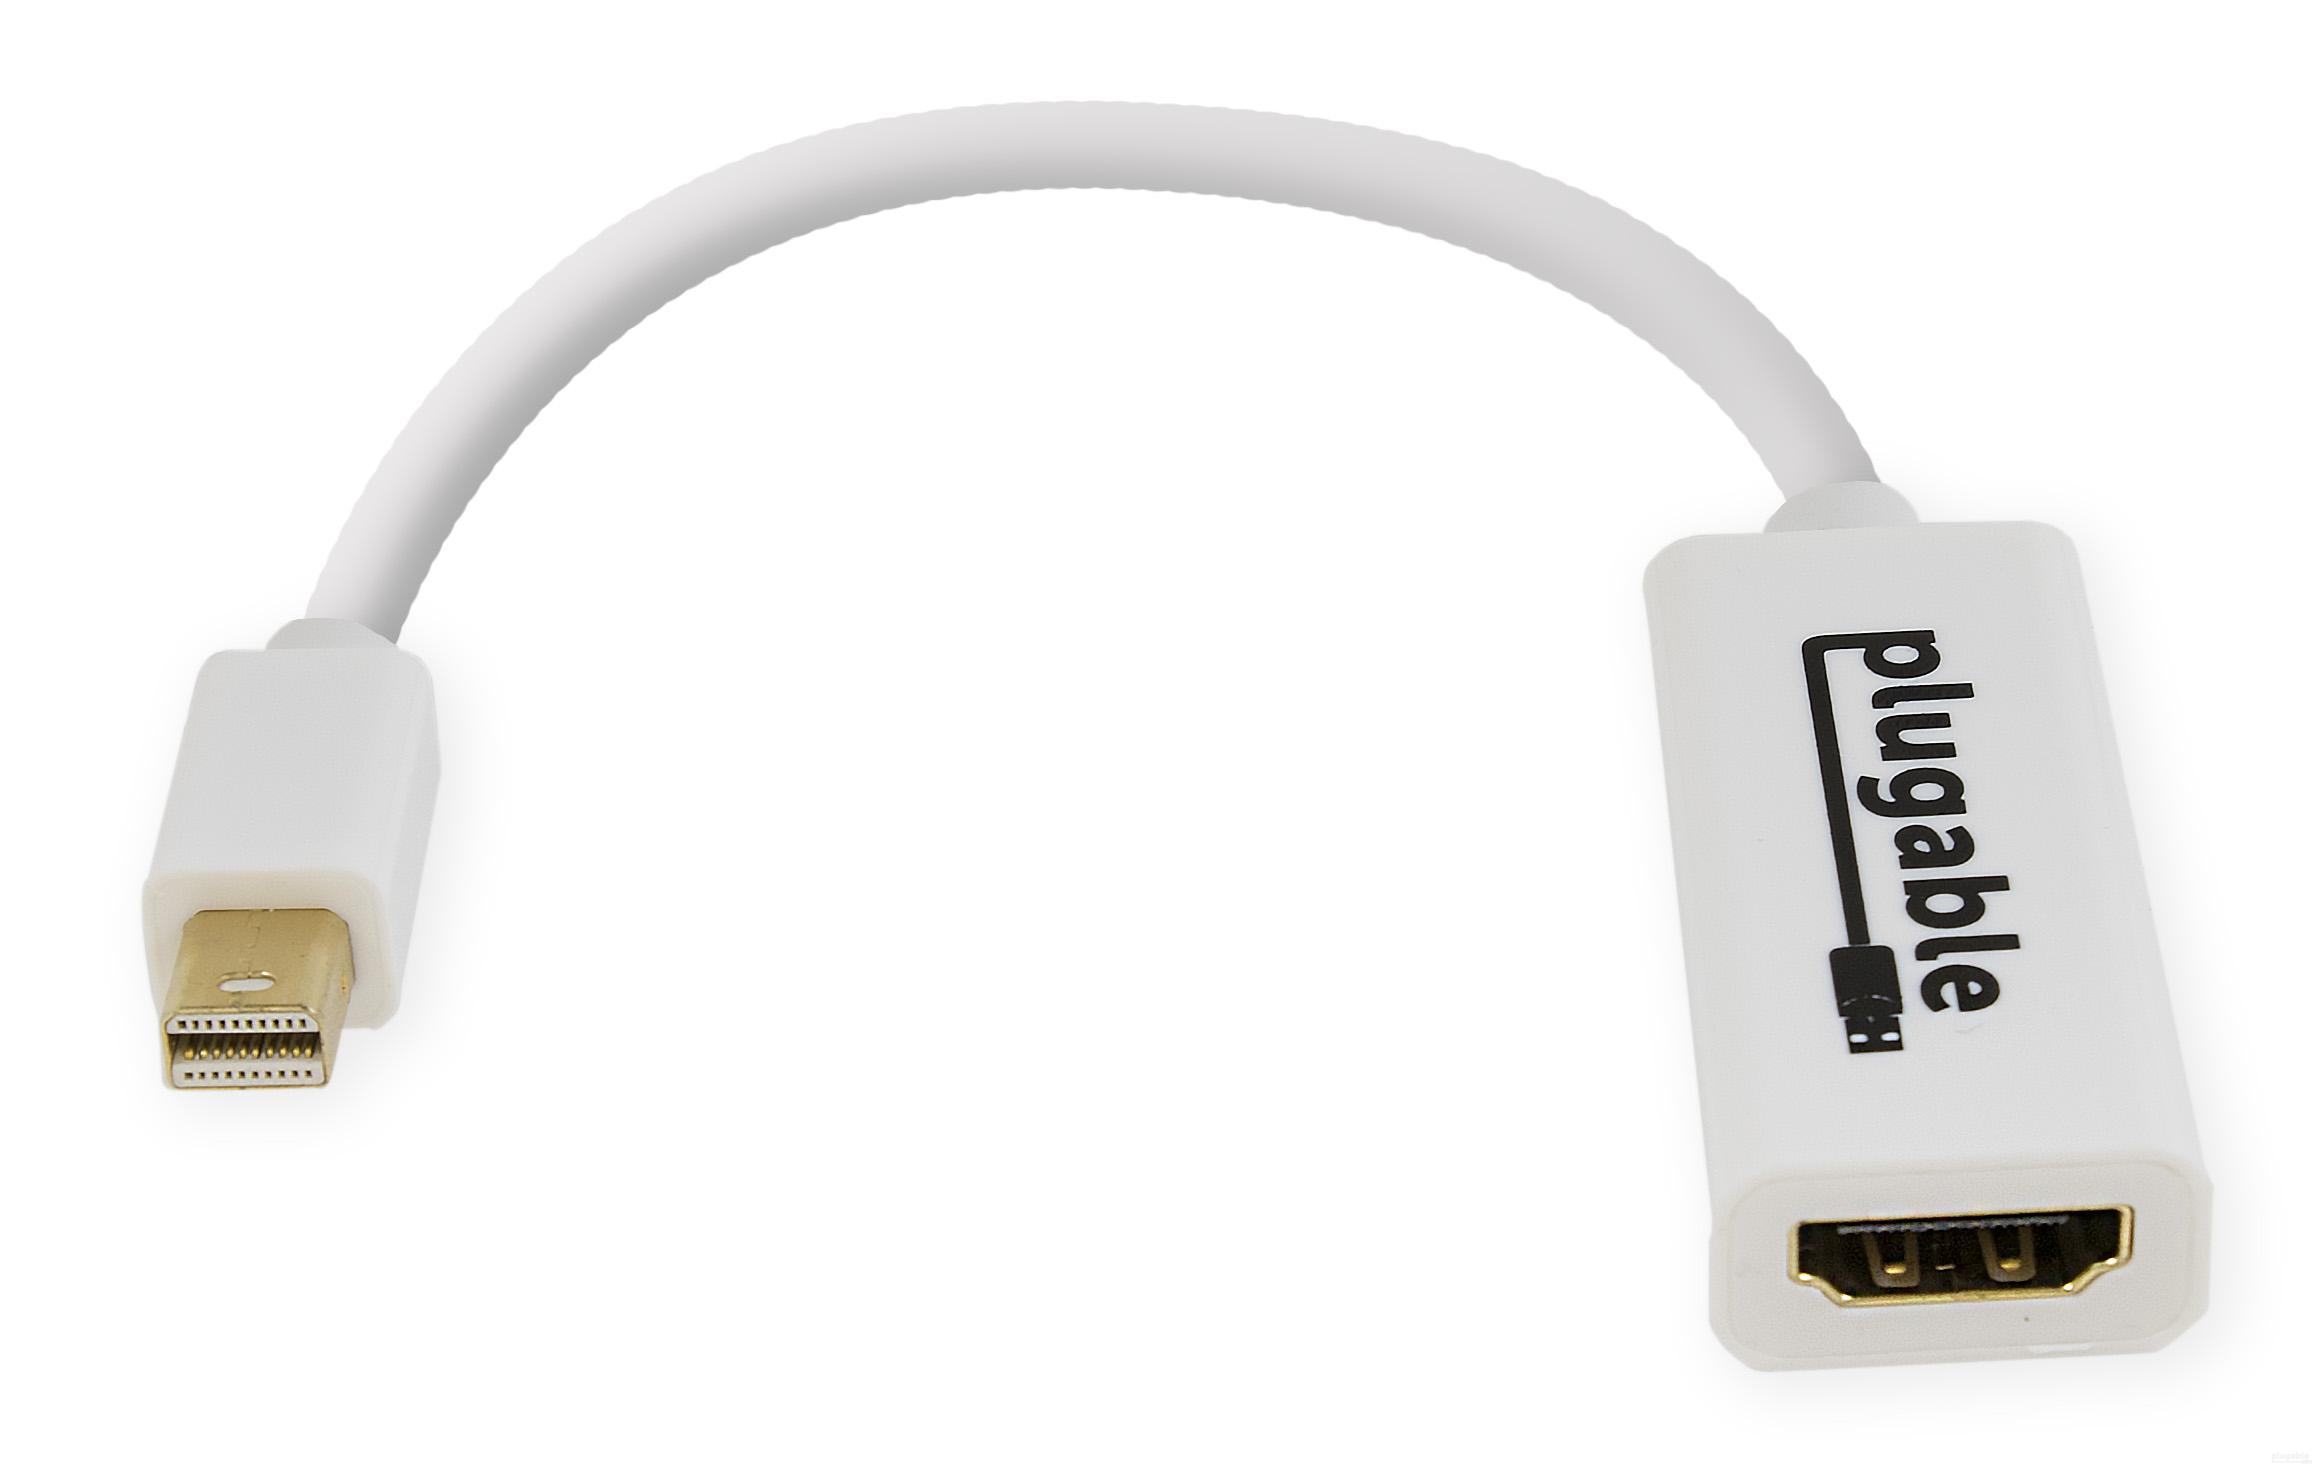 Plugable Mini DisplayPort (Thunderbolt 2) to HDMI Adapter (Supports Mac, Windows, Linux, and Displays up to 4K 3840x2160@30Hz, Passive) - image 1 of 5